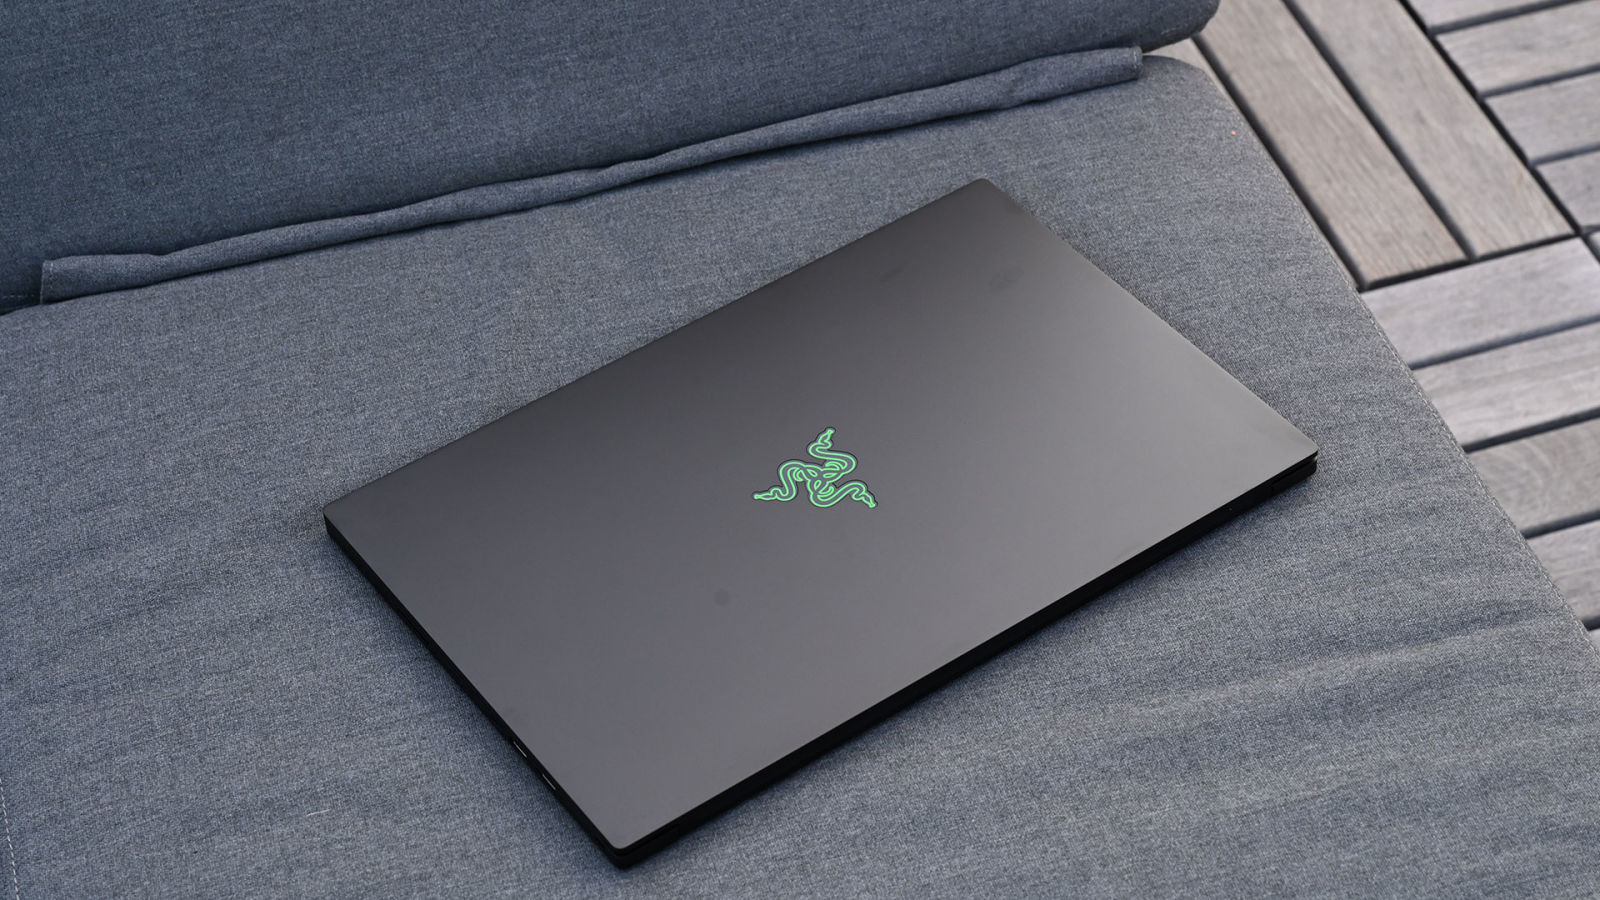 Illustration for article titled The Razer Blade 15 Advanced Is the MacBook Pro of Gaming Laptops